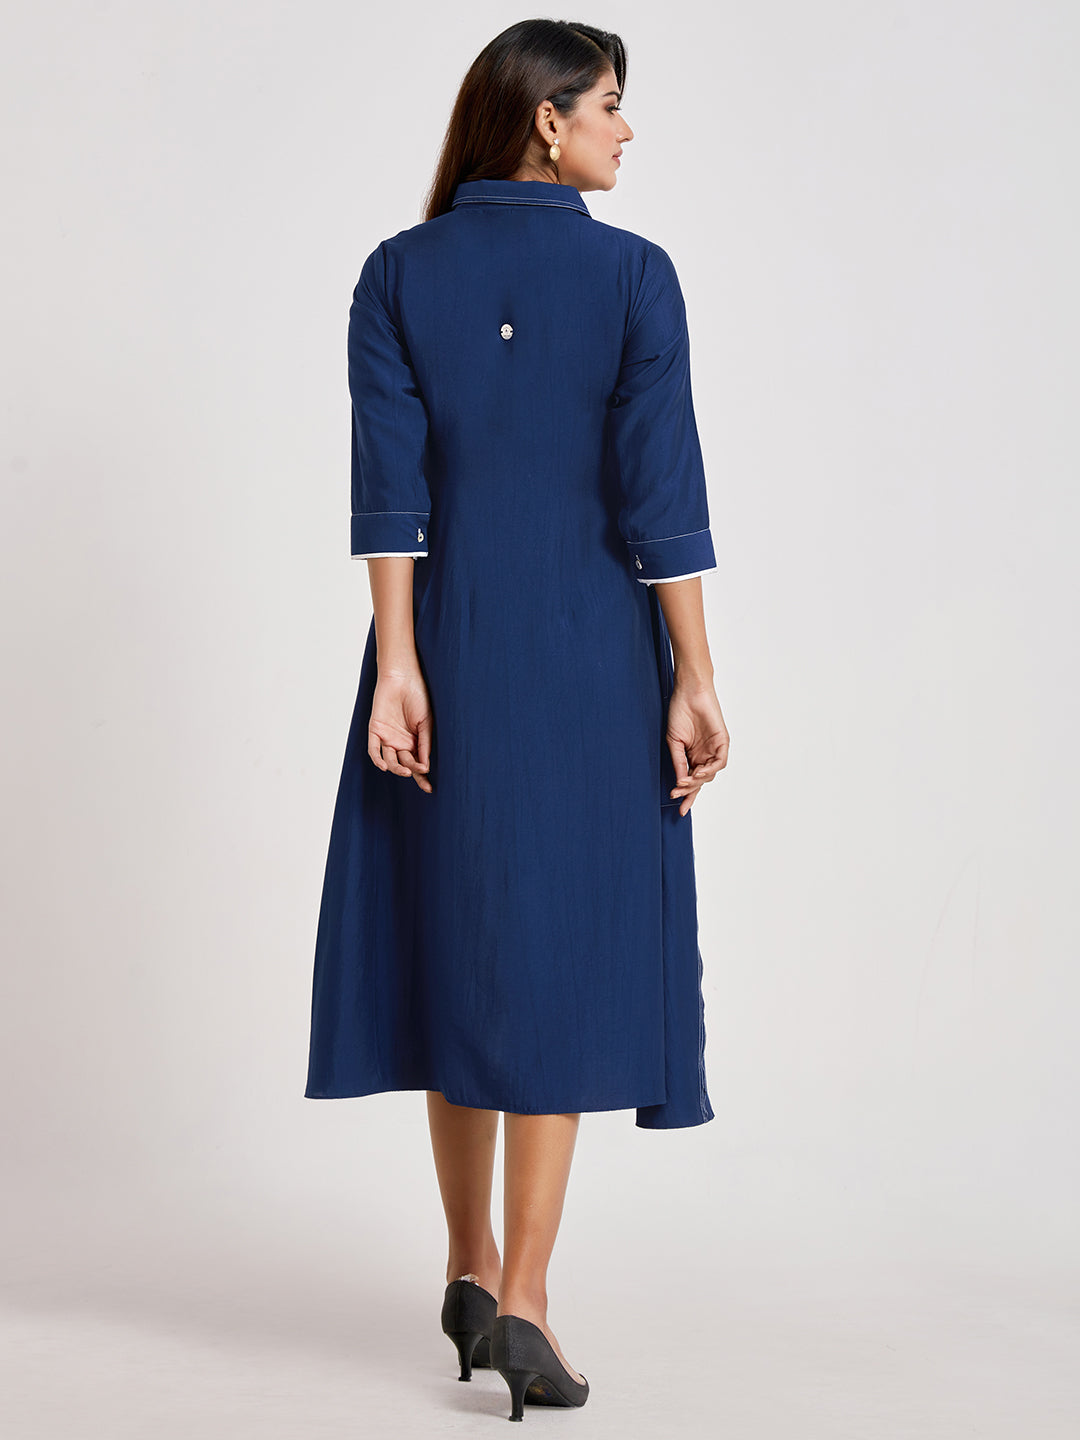 Shirt Style Dress With Mock Buttons - ARH1137